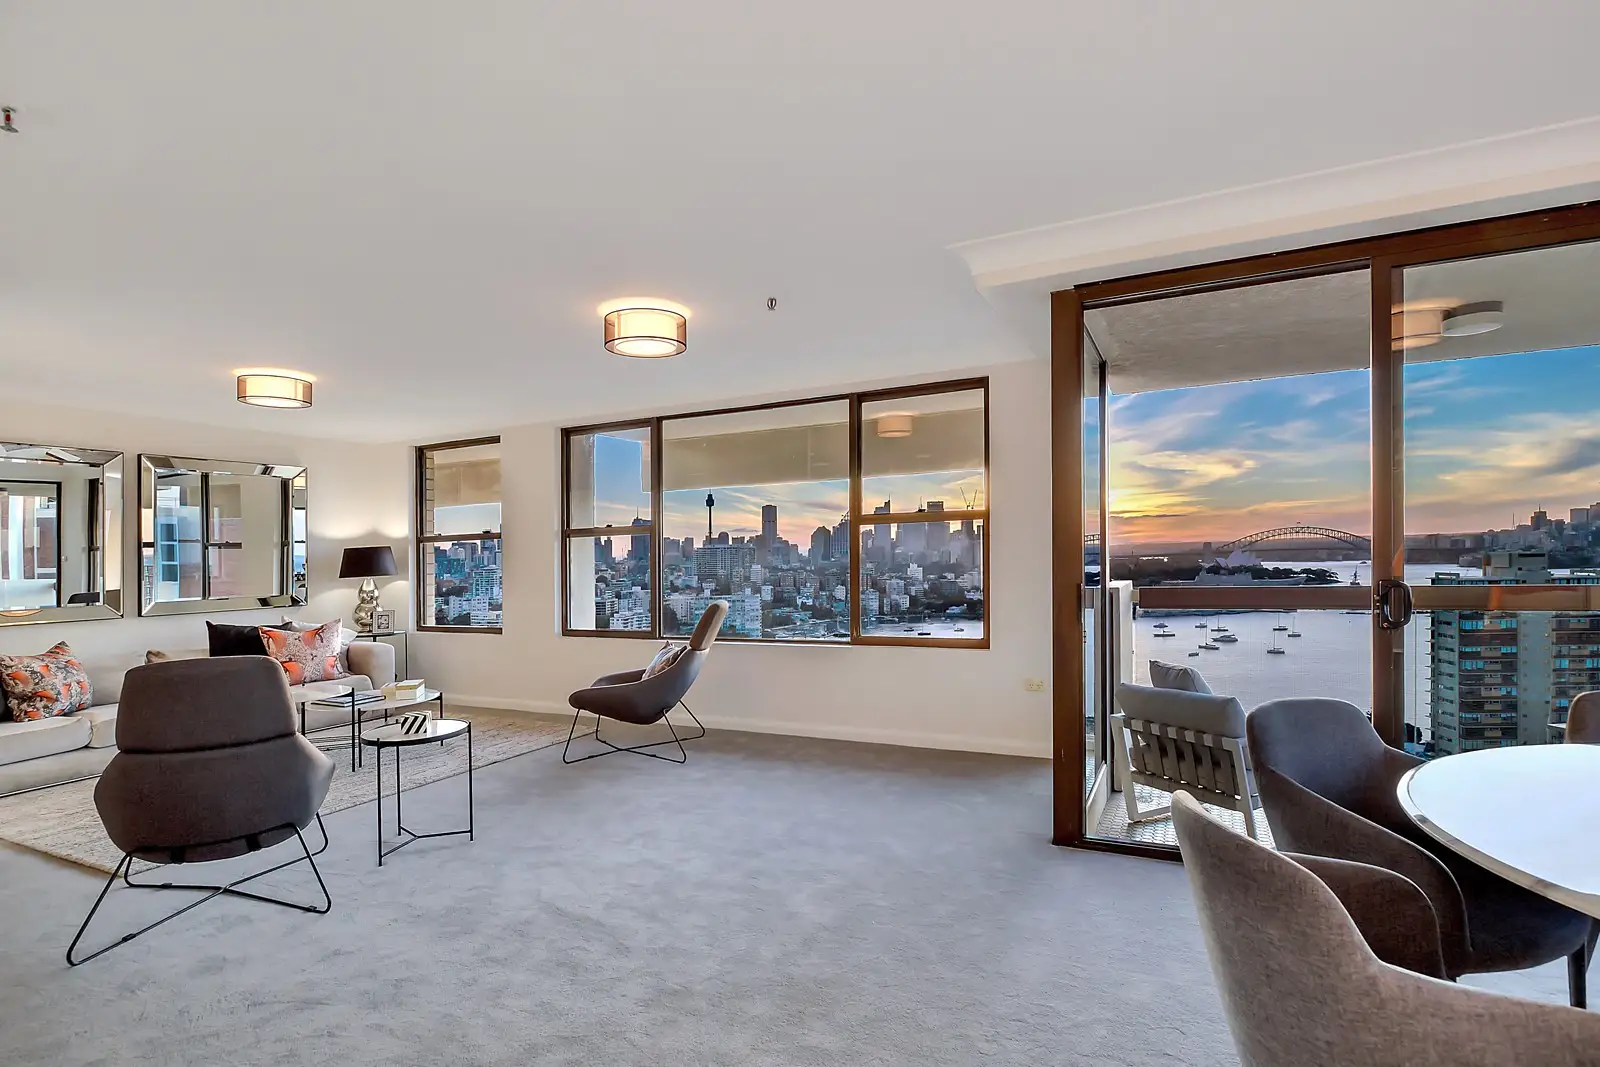 Photo #3: 32/60 Darling Point Road, Darling Point - Sold by Sydney Sotheby's International Realty